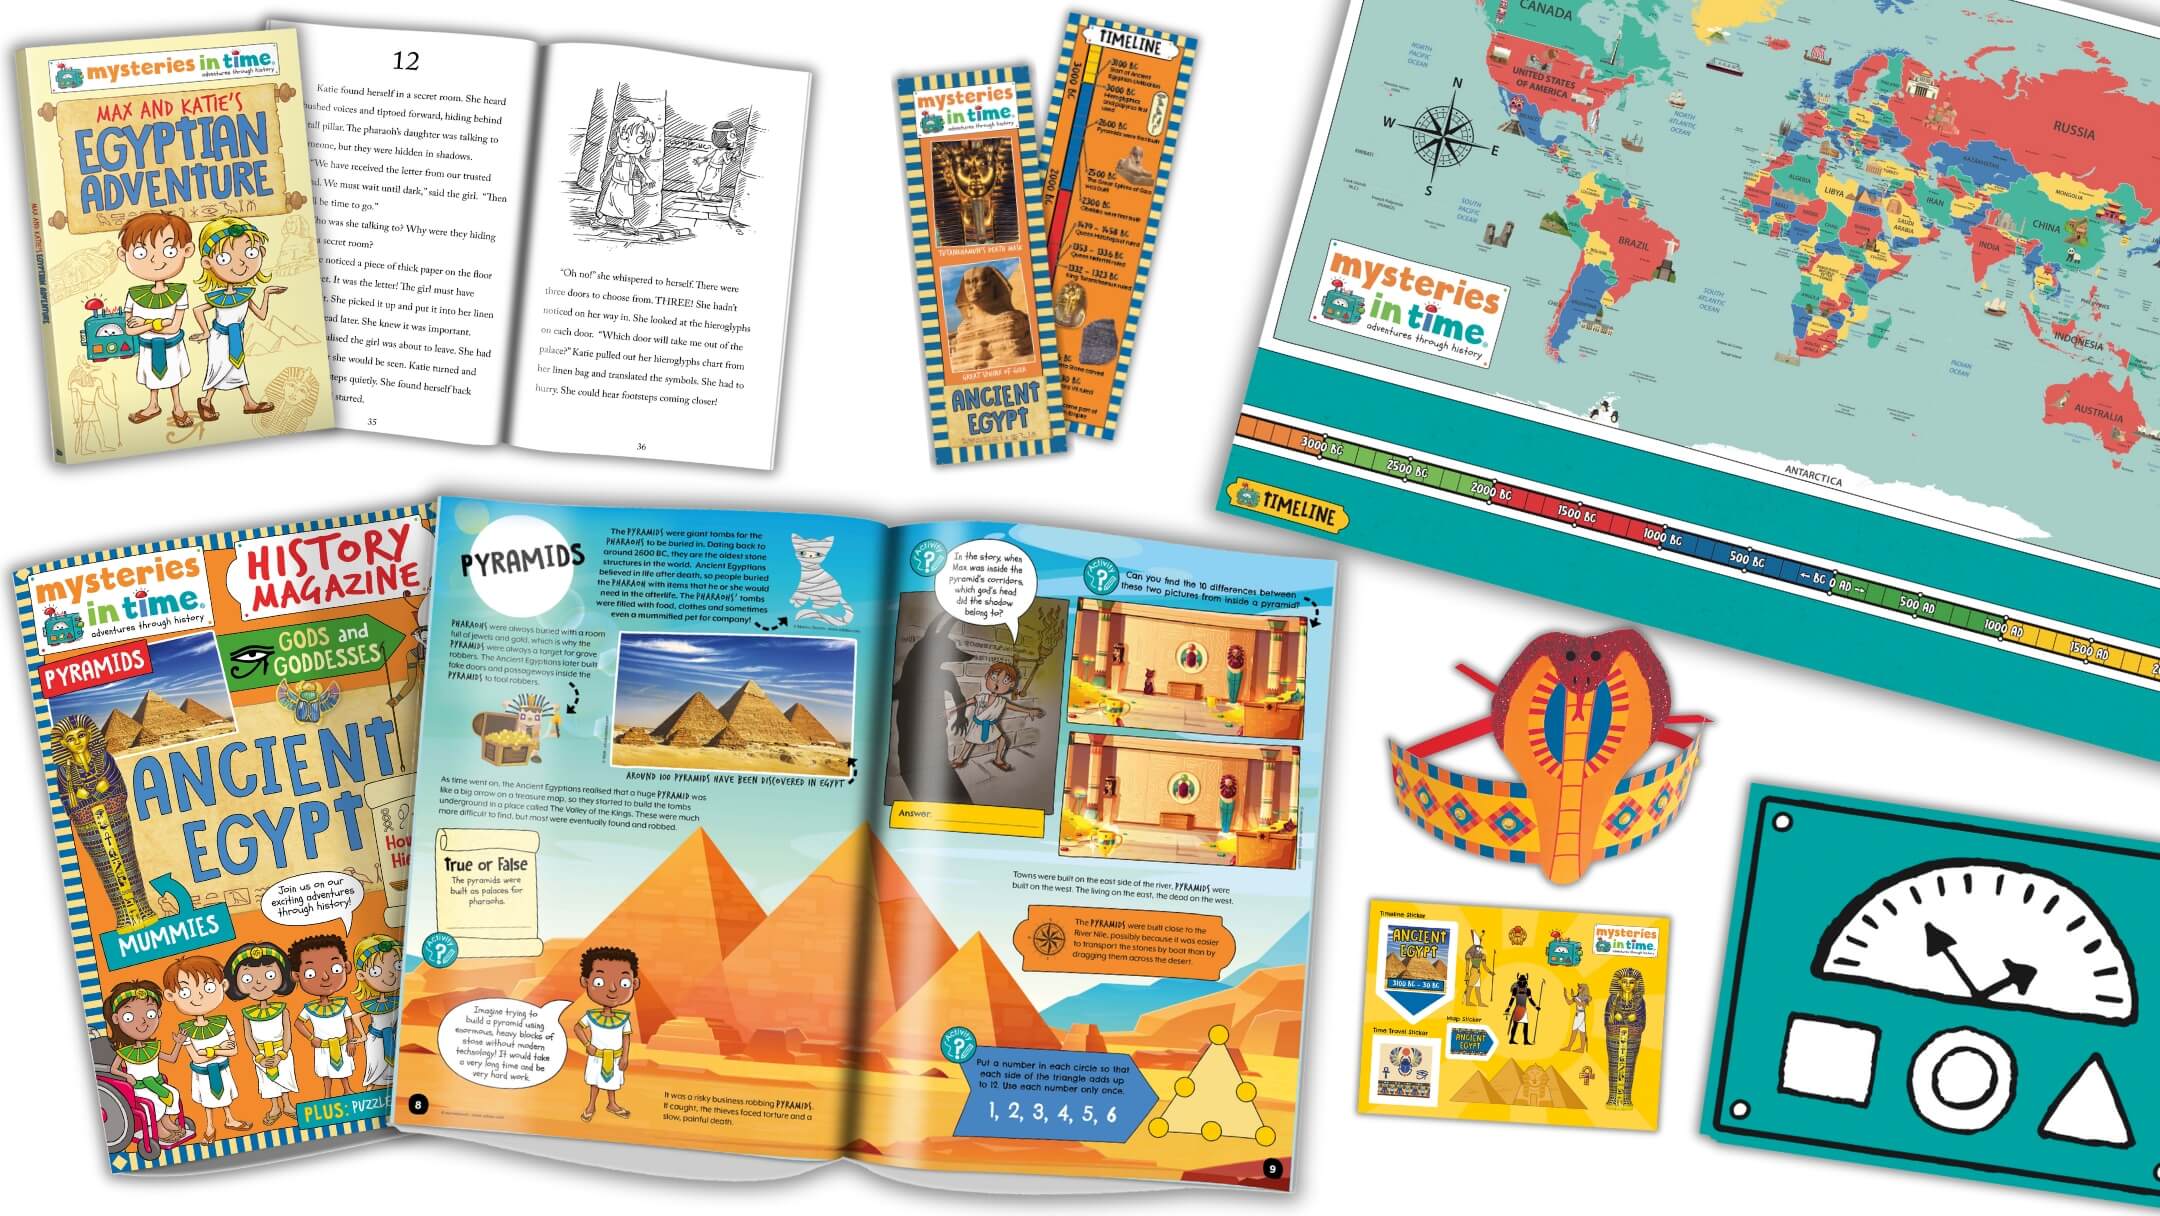 History Subscription Box for kids - Mysteries in Time Ancient Egypt Box Contents